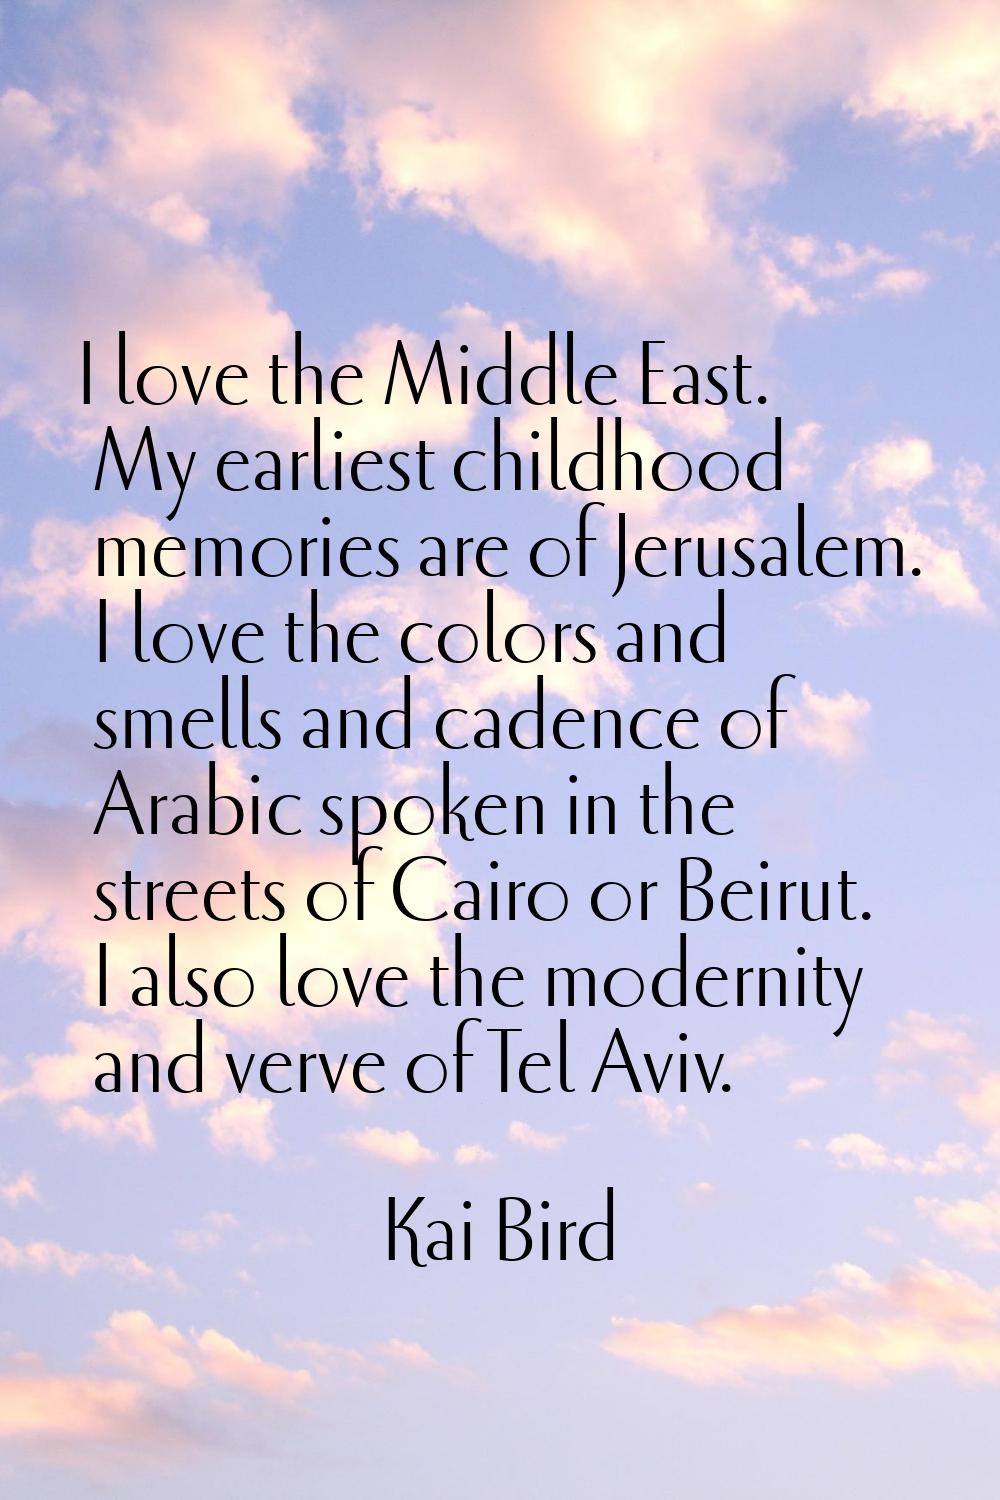 I love the Middle East. My earliest childhood memories are of Jerusalem. I love the colors and smel